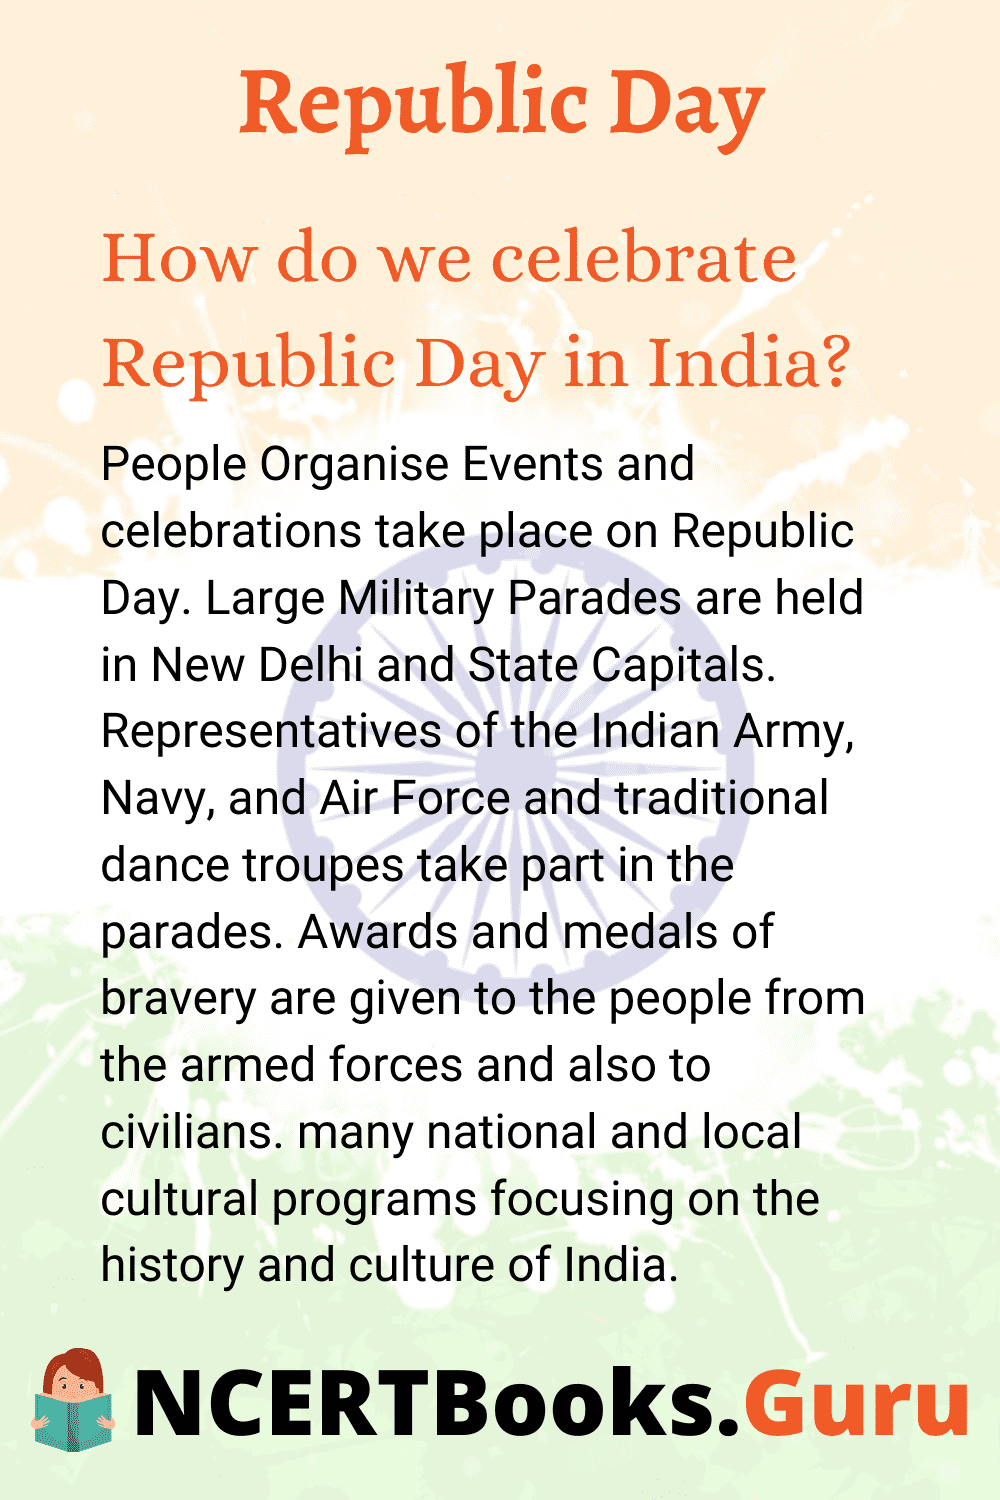 How to Celebrate Republic Day